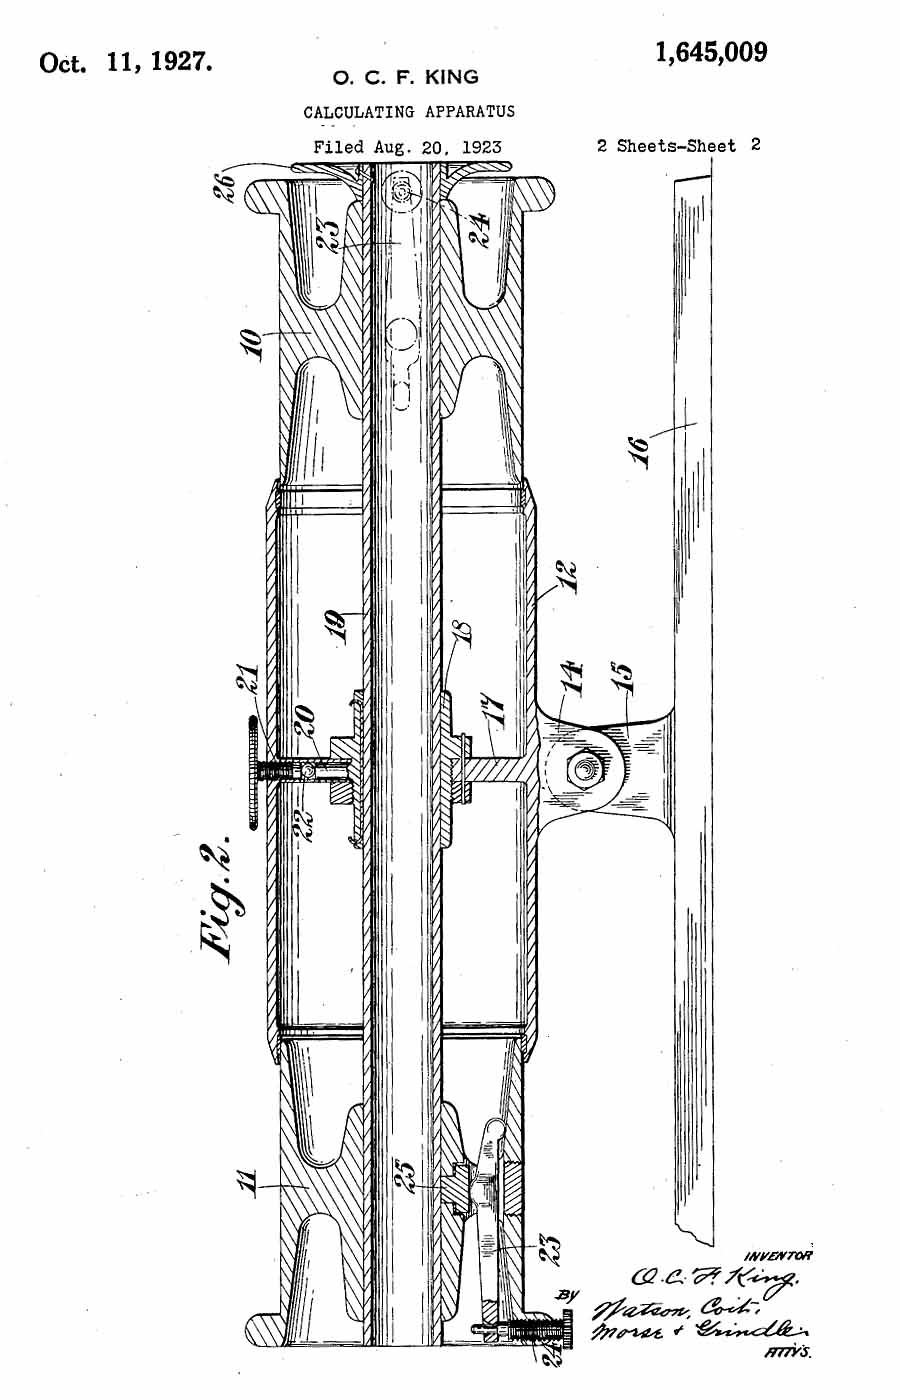 Patent Page 2 with Figure 2